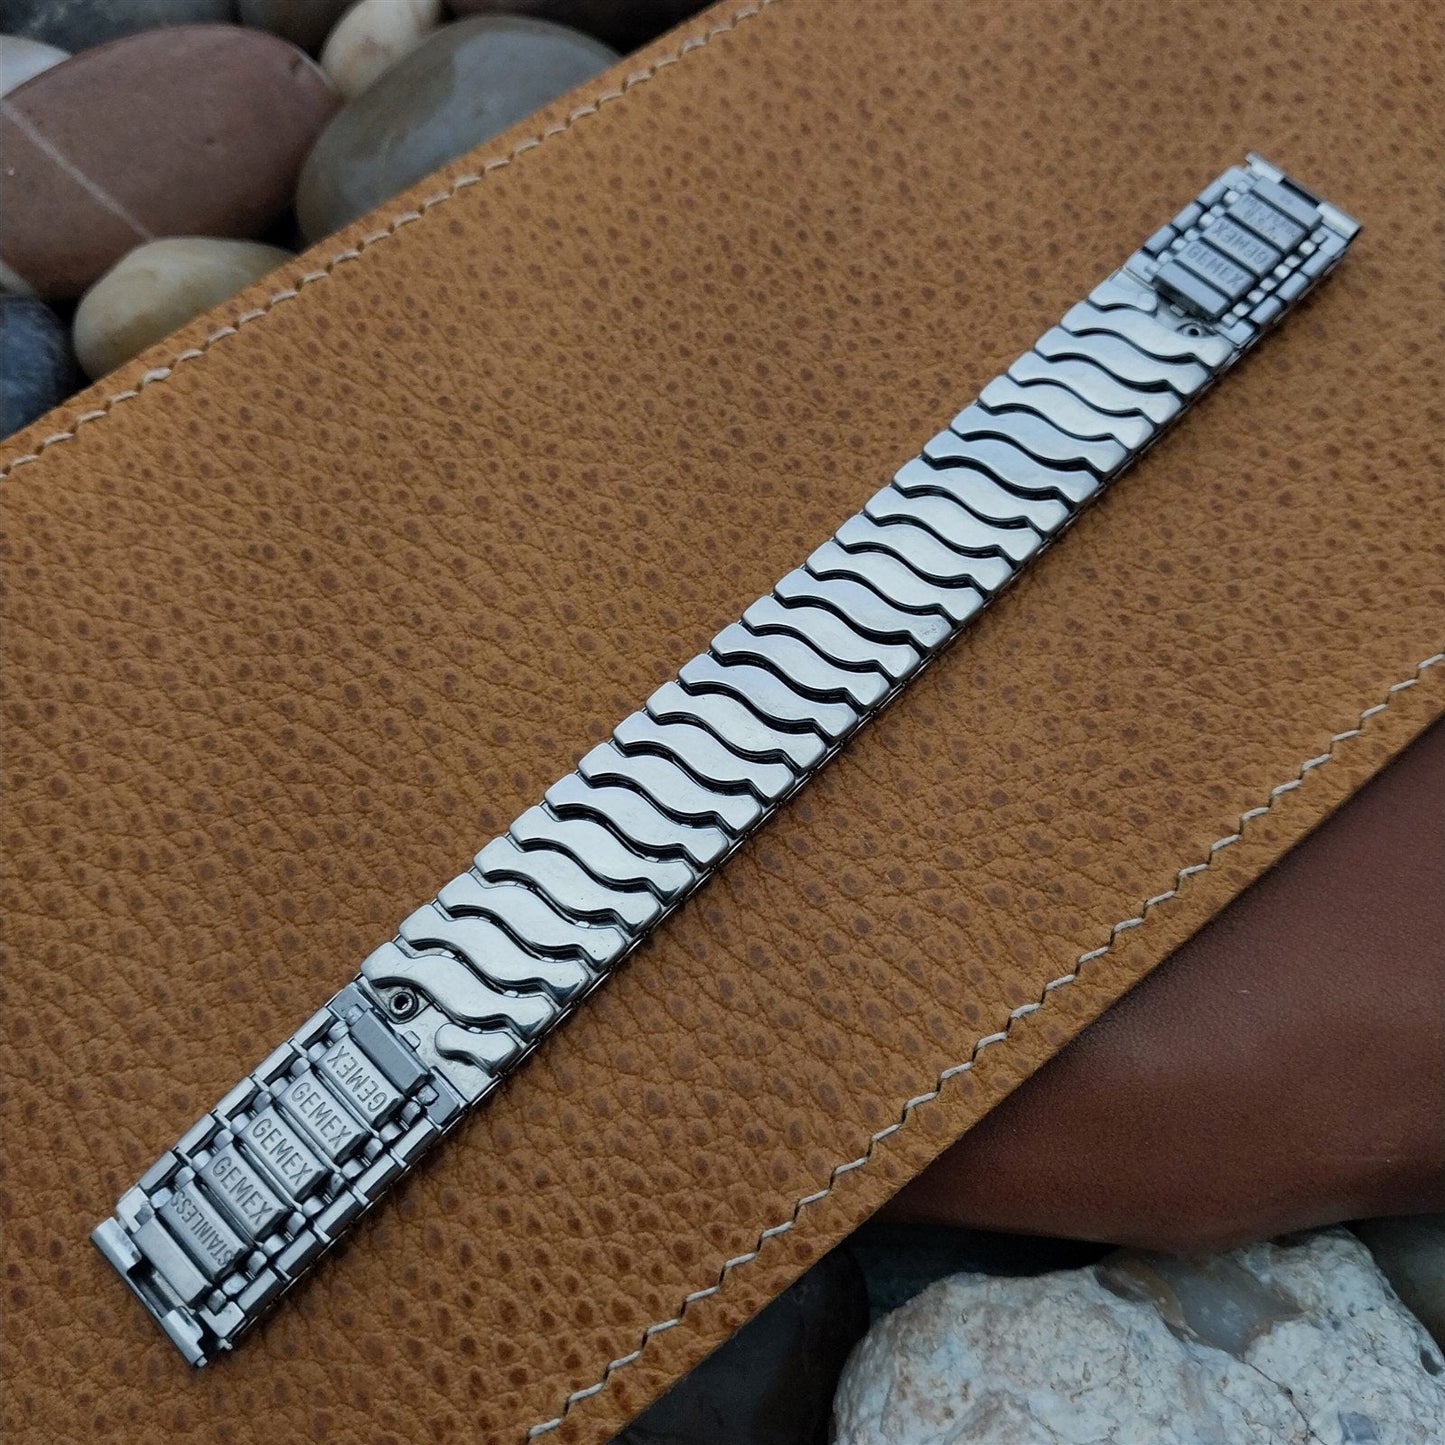 9/16" 1950s Vintage Watch Band Gemex Classic Stainless Steel Unused Expansion